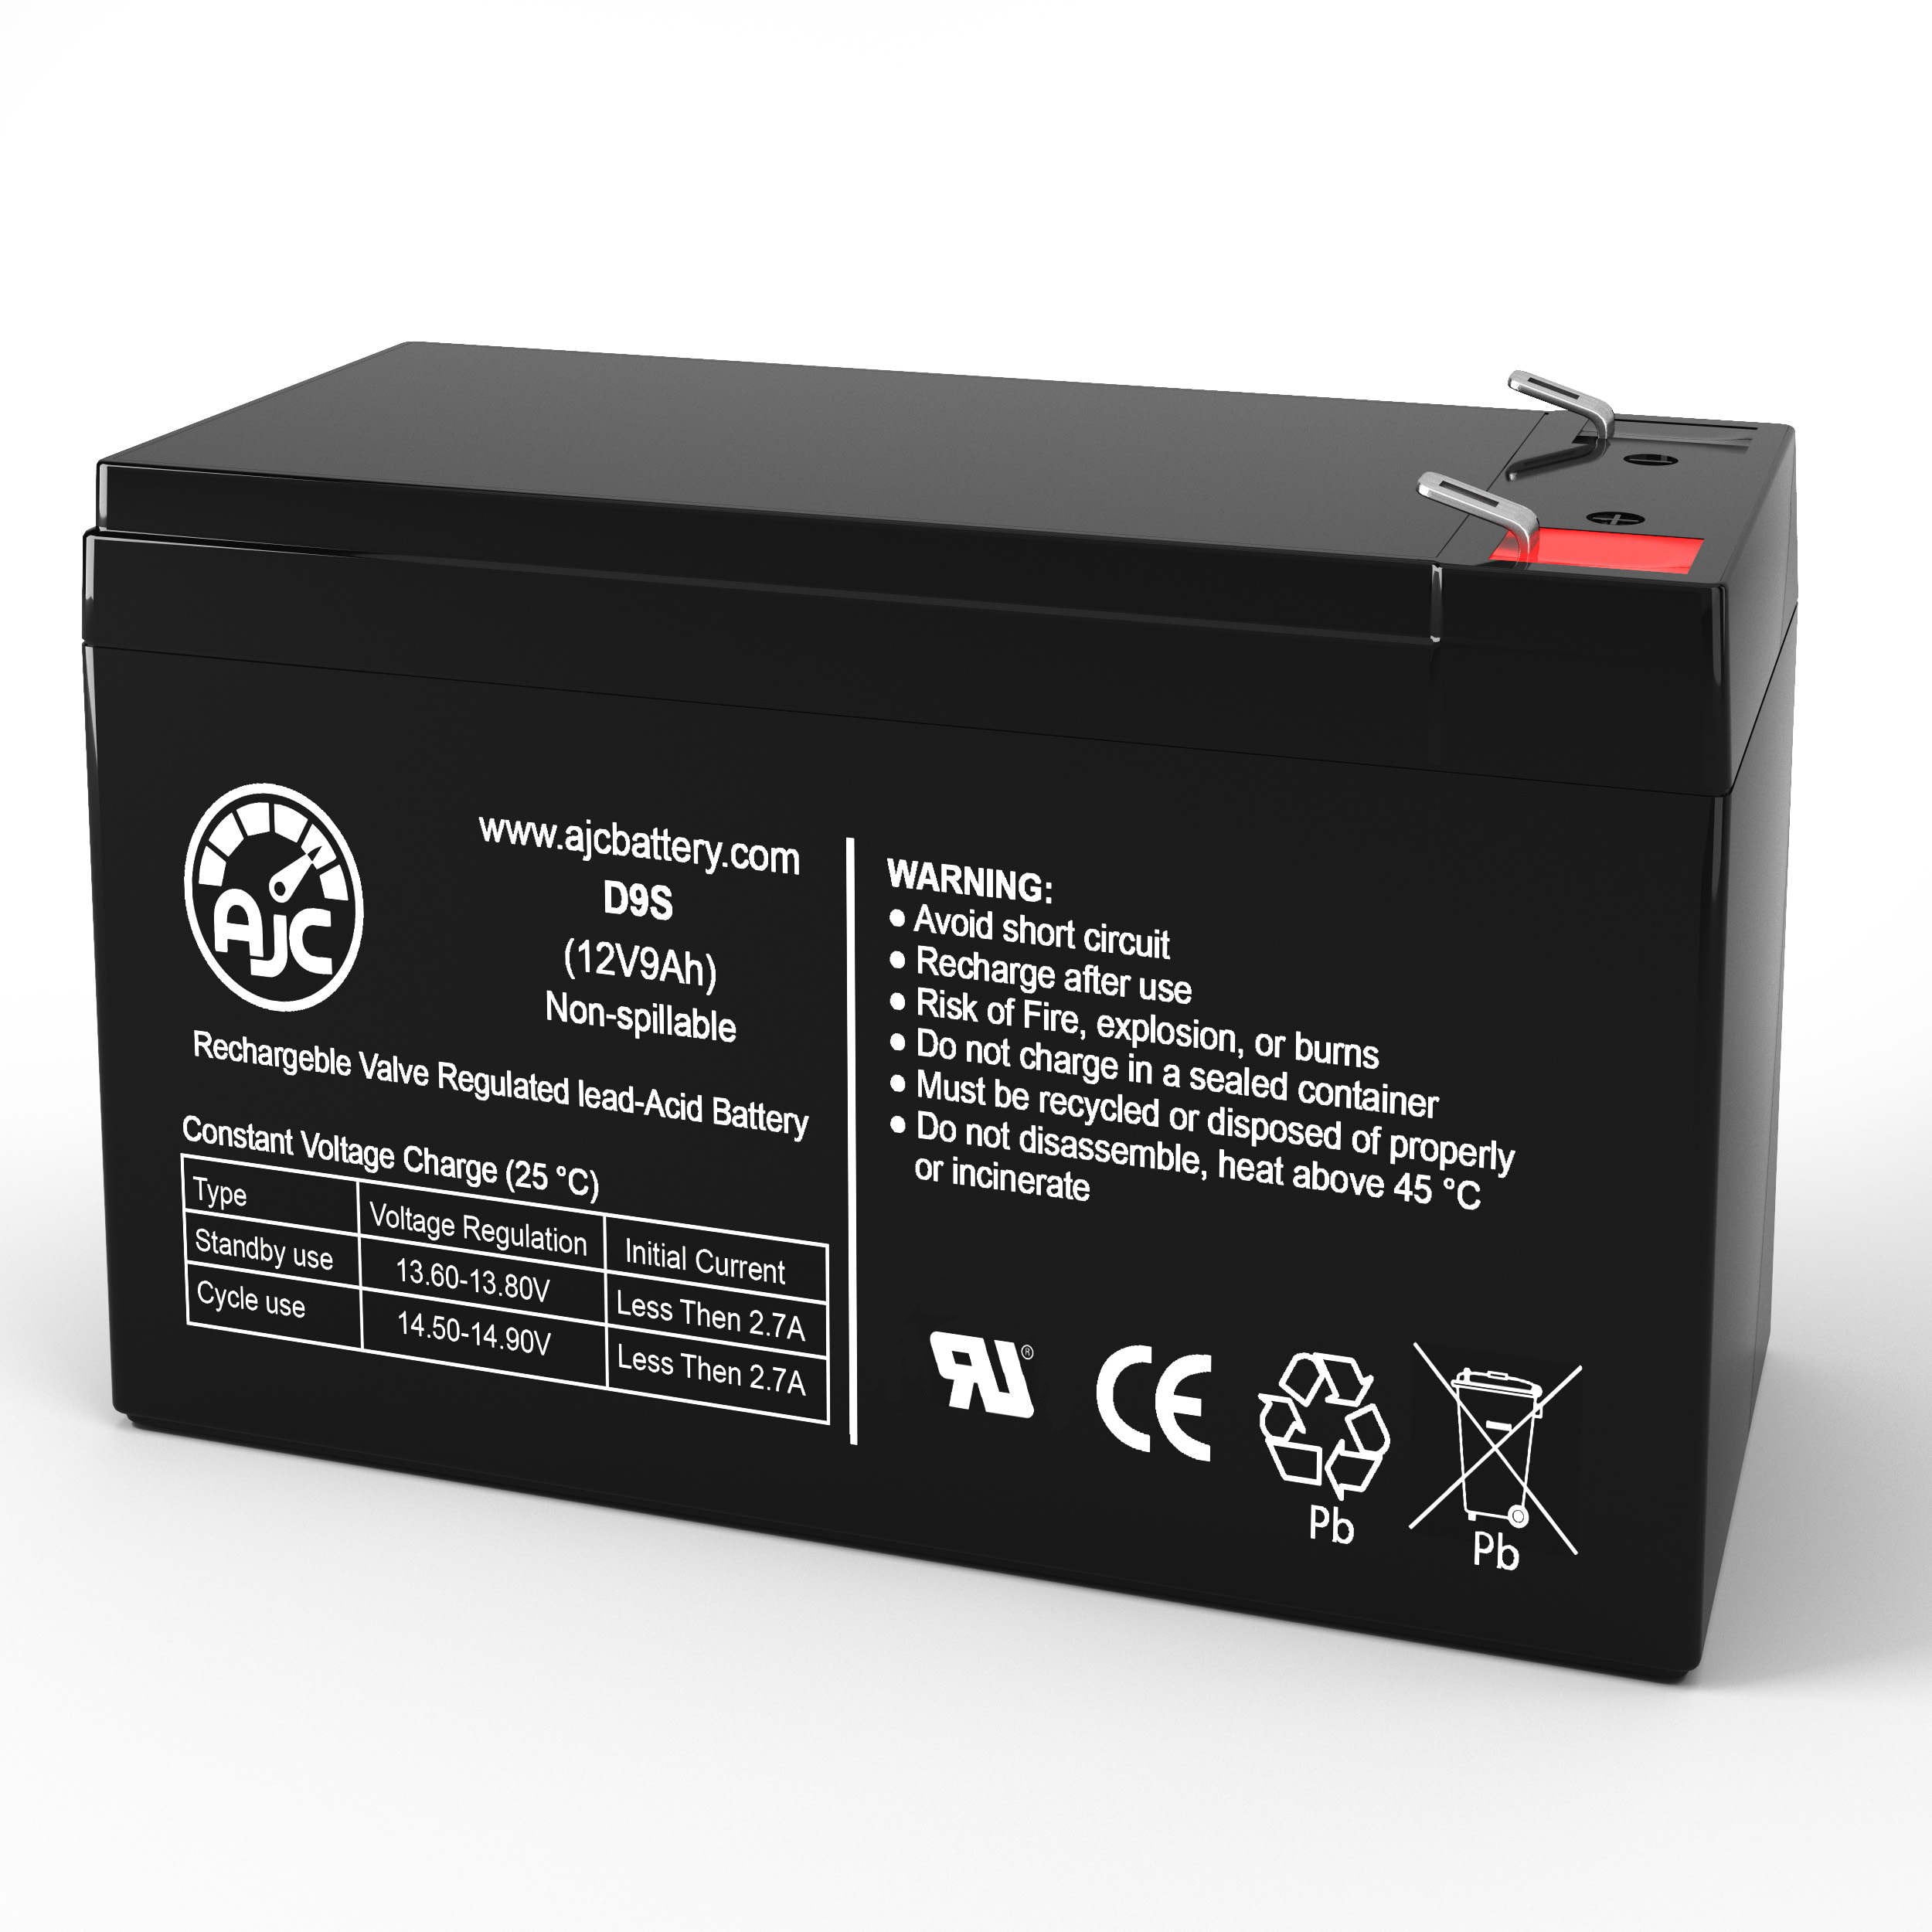 This is an AJC Brand Replacement AJC Battery Brand Replacement for Werker WKA12-9F2 12V 9Ah UPS Battery